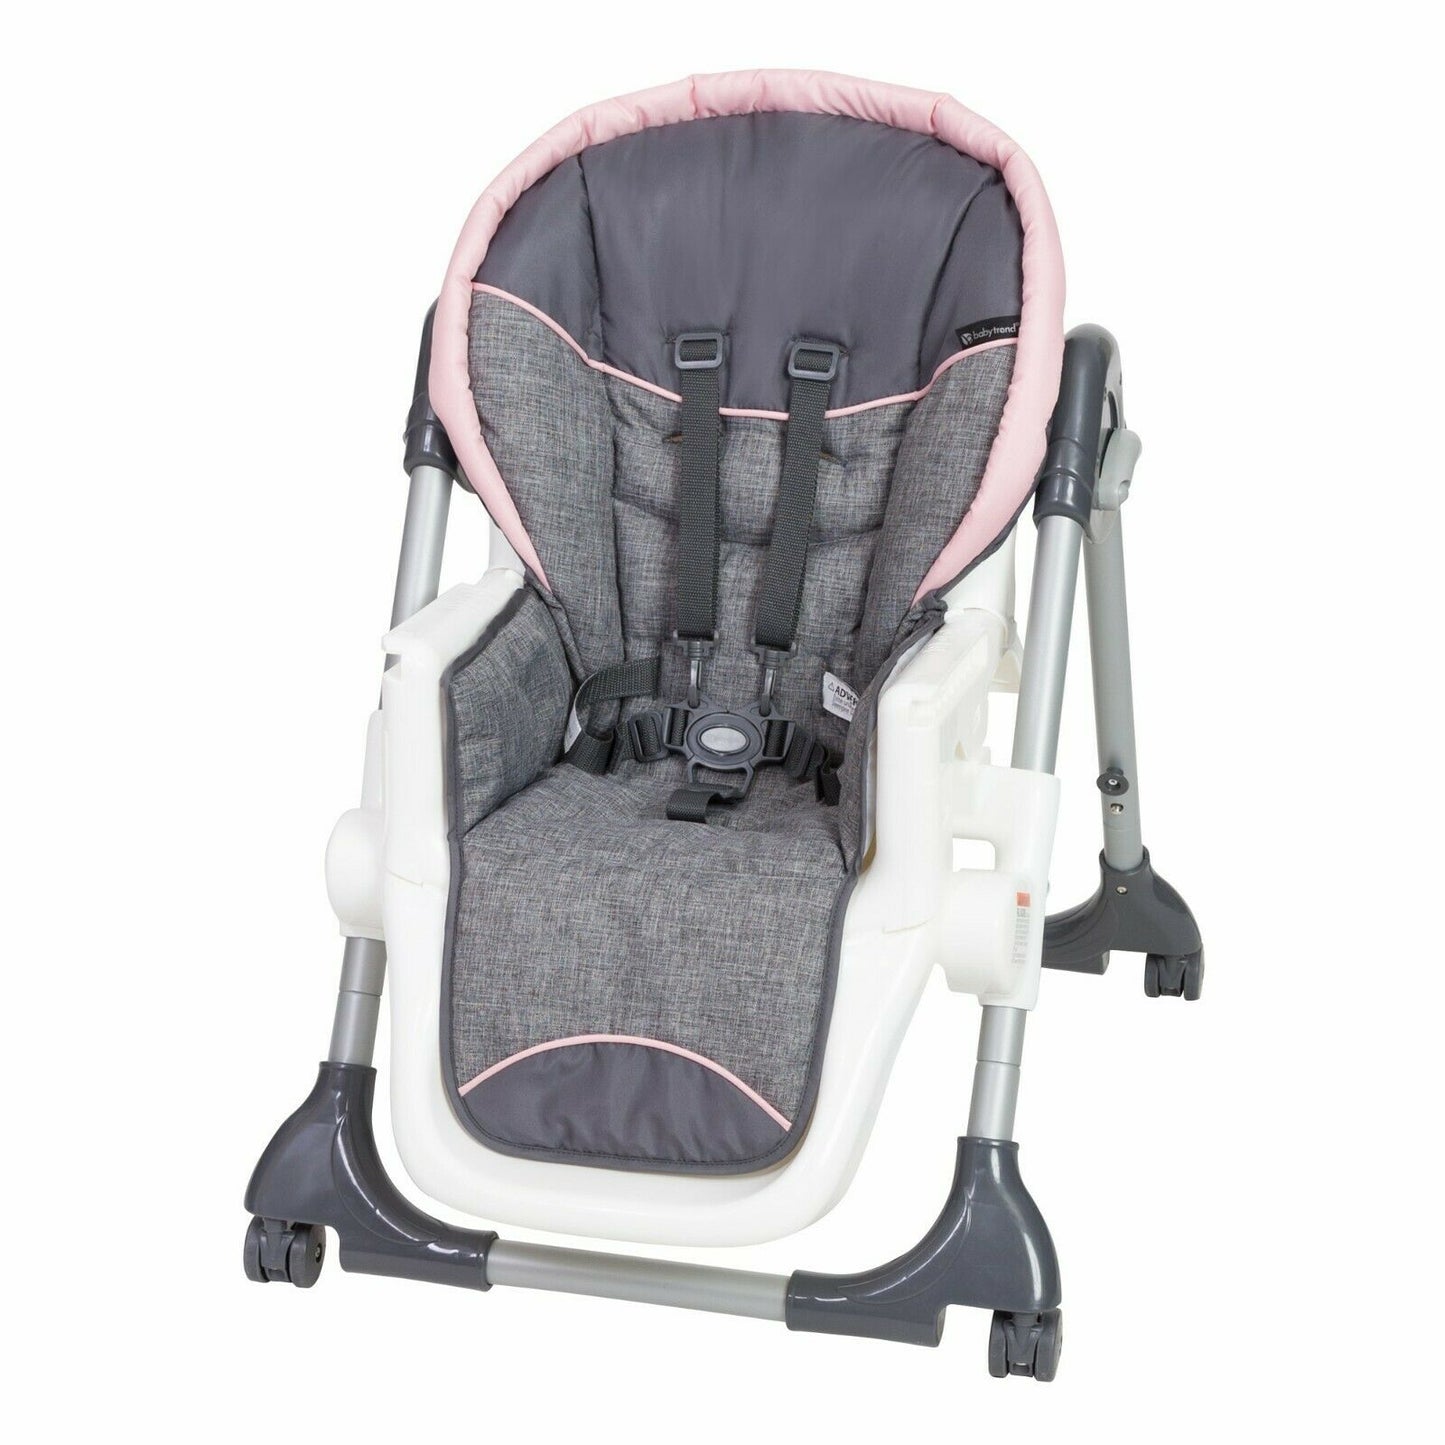 Baby Trend Travel System  Car Seat Girls Travel System  High Chair Playard Combo